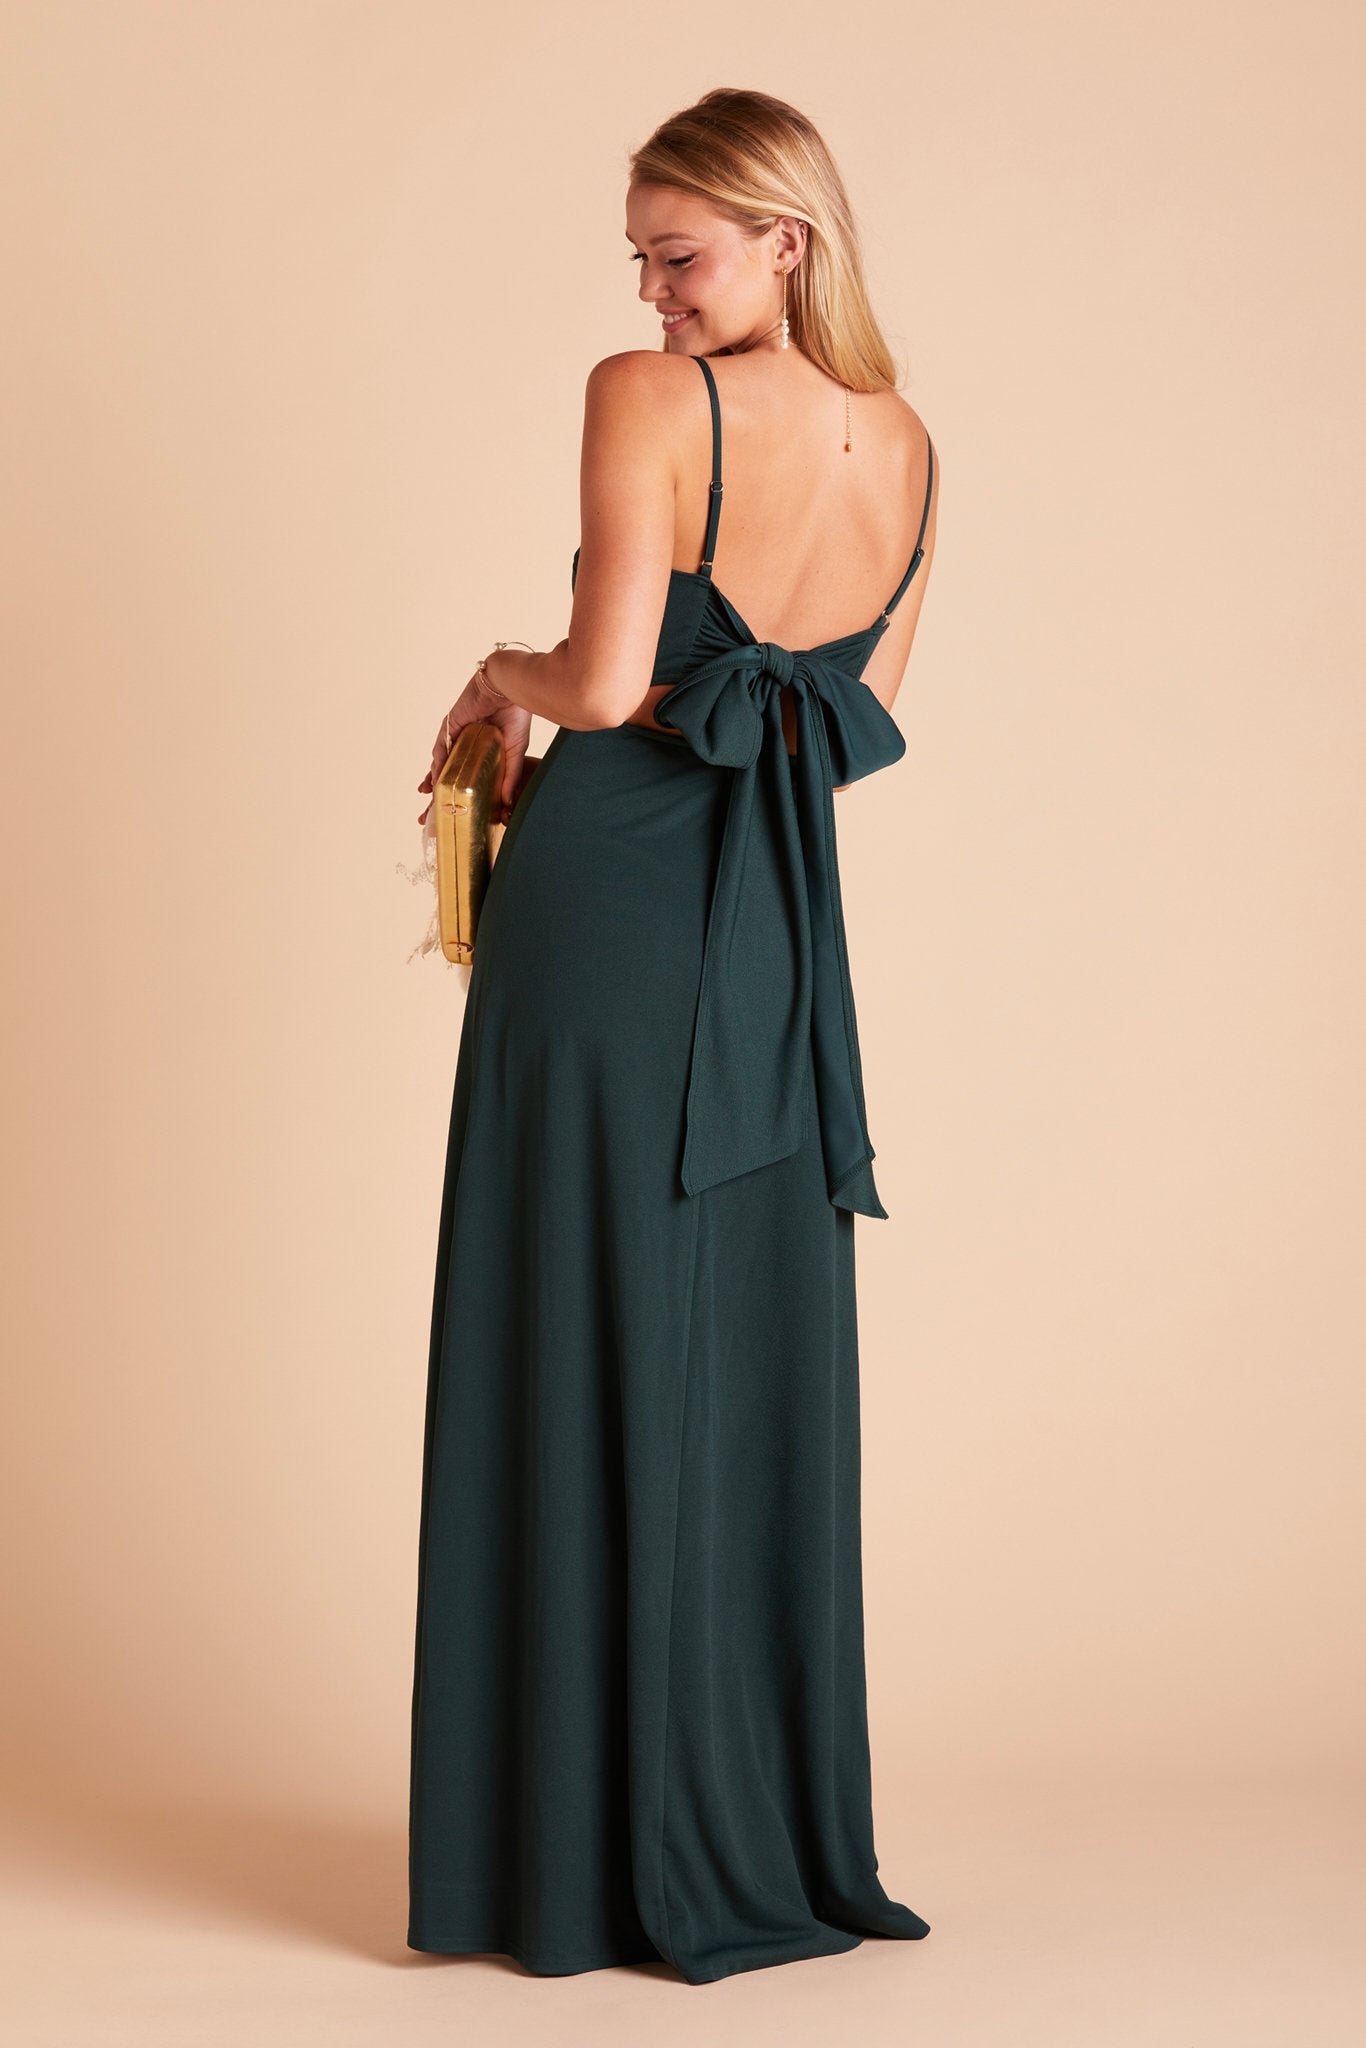 Benny bridesmaid dress in emerald green crepe by Birdy Grey, back view